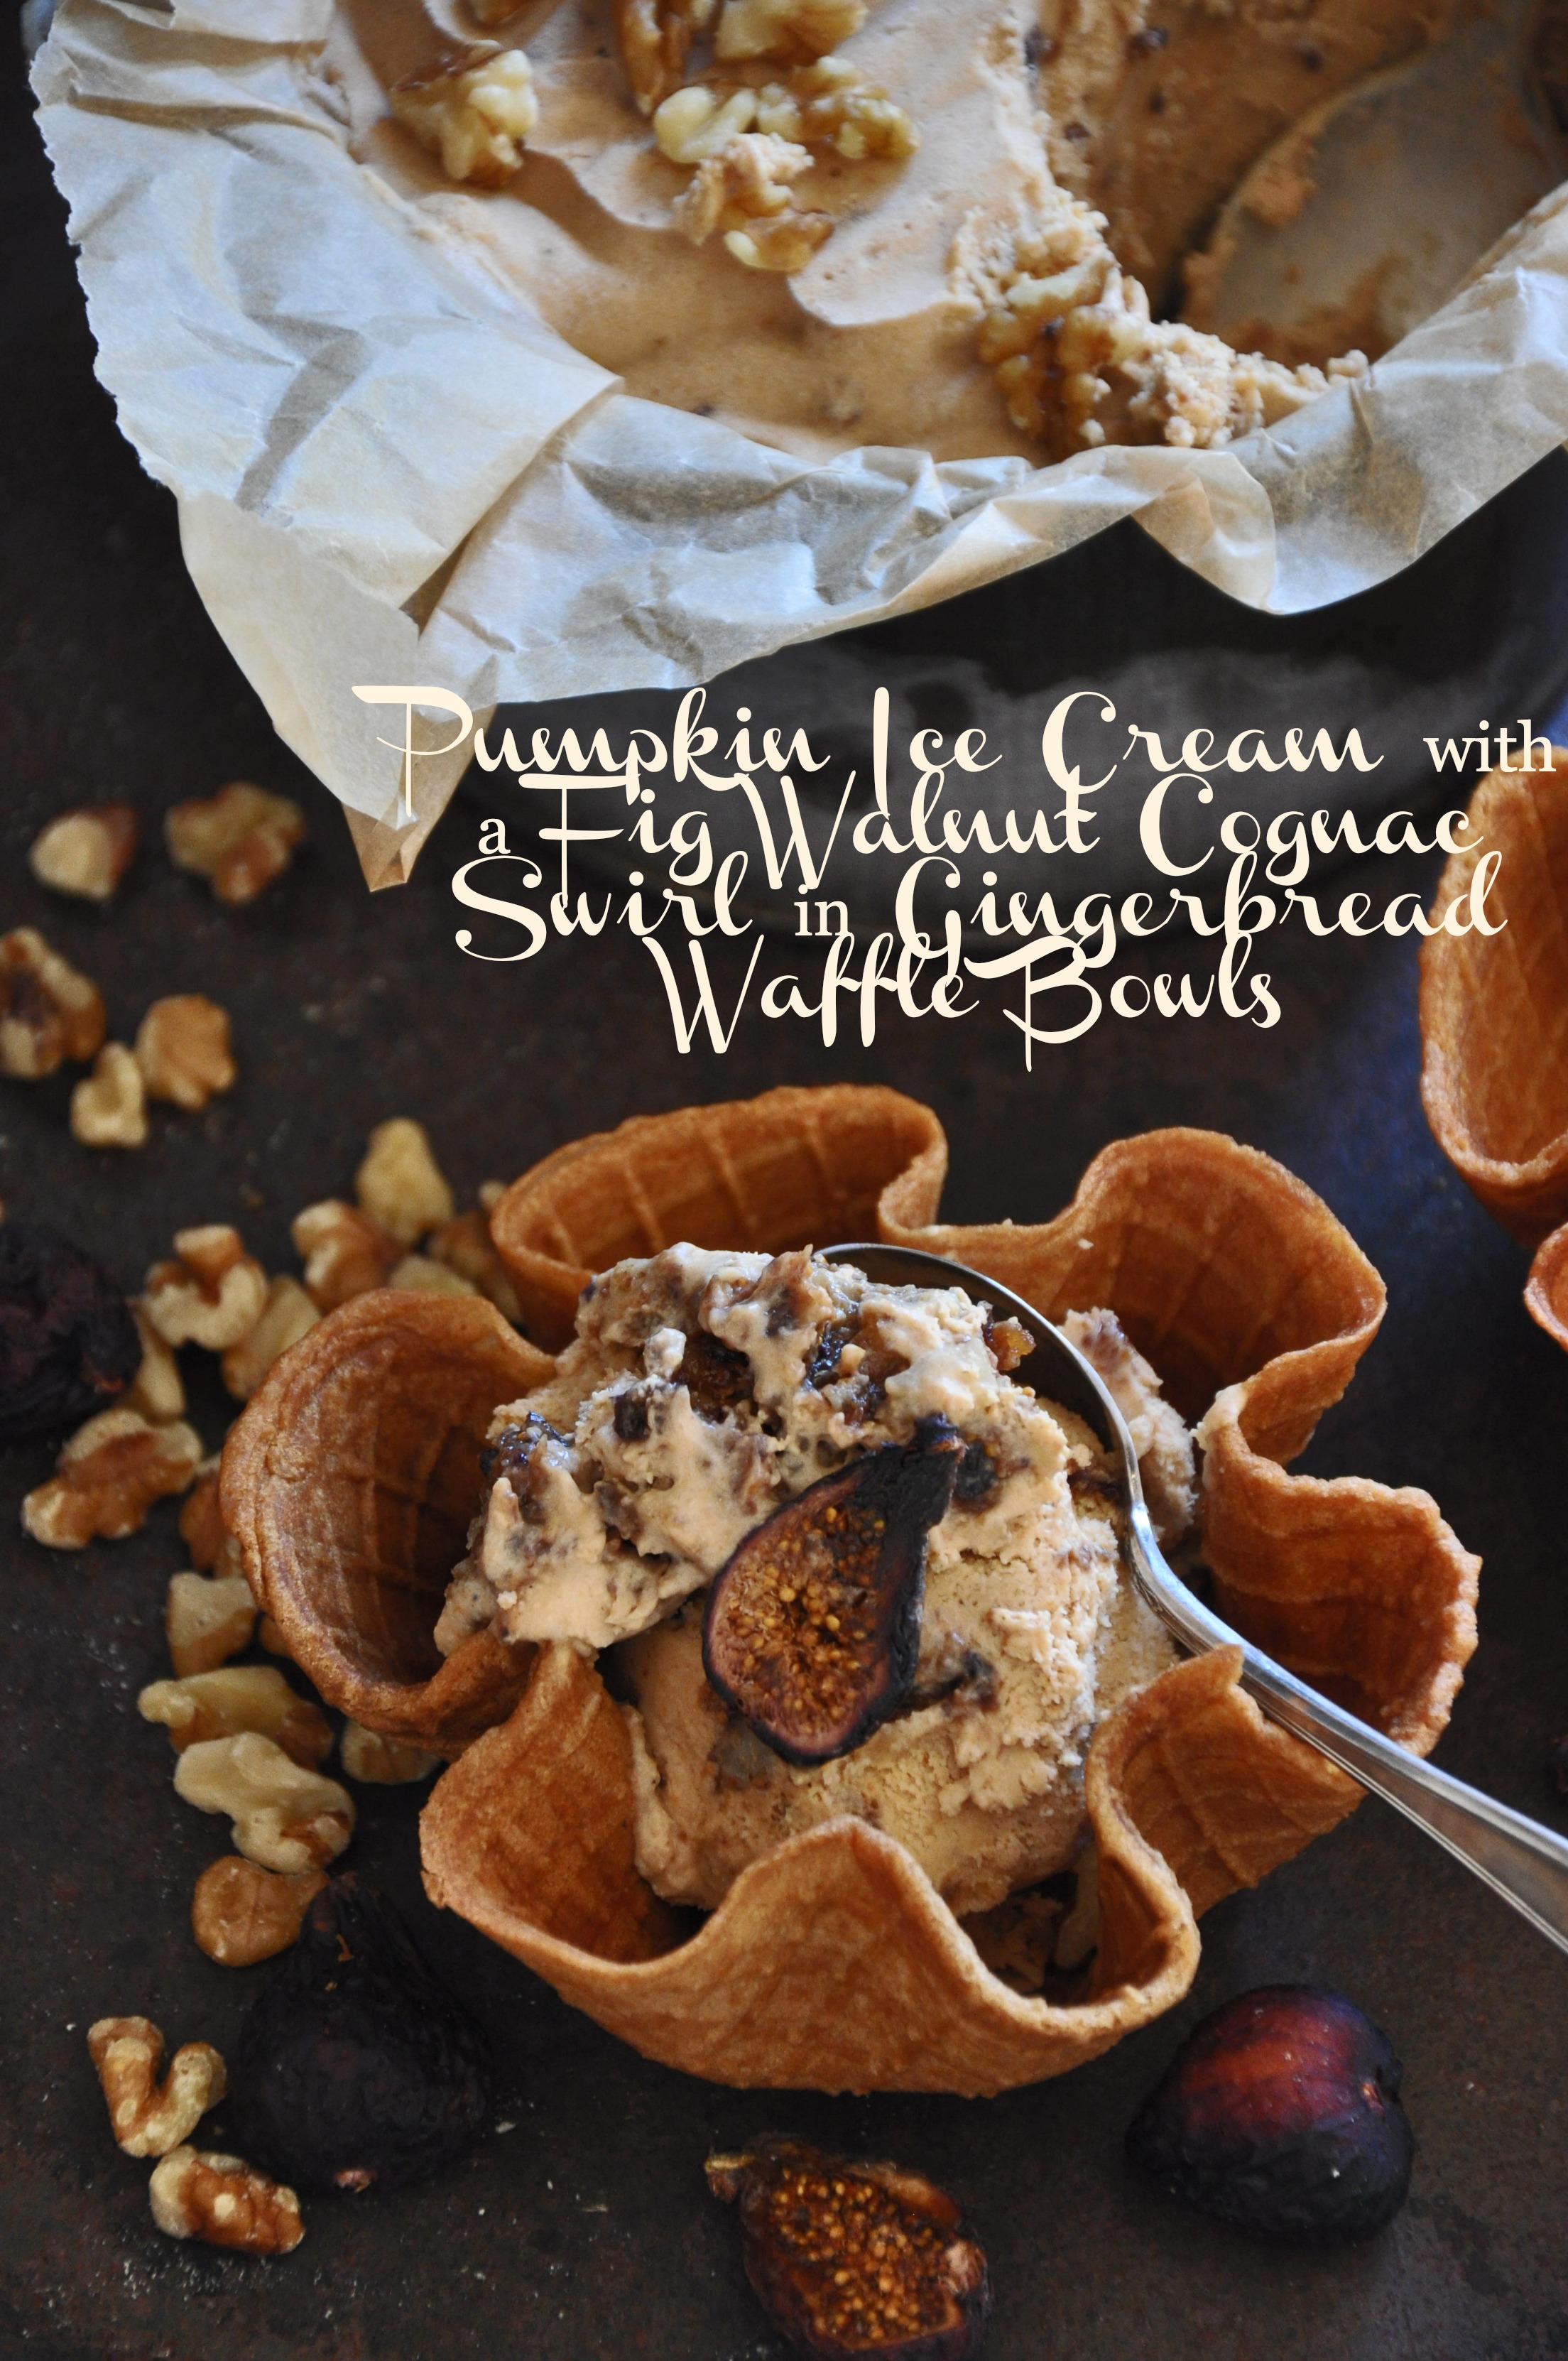 http://www.siftingfocus.com/wp-content/uploads/2013/11/Pumpkin-Ice-Cream-with-a-Fig-Cognac-Walnut-Swirl-in-a-Gingerbread-Waffle-Bowl103013008PSEPM.jpg